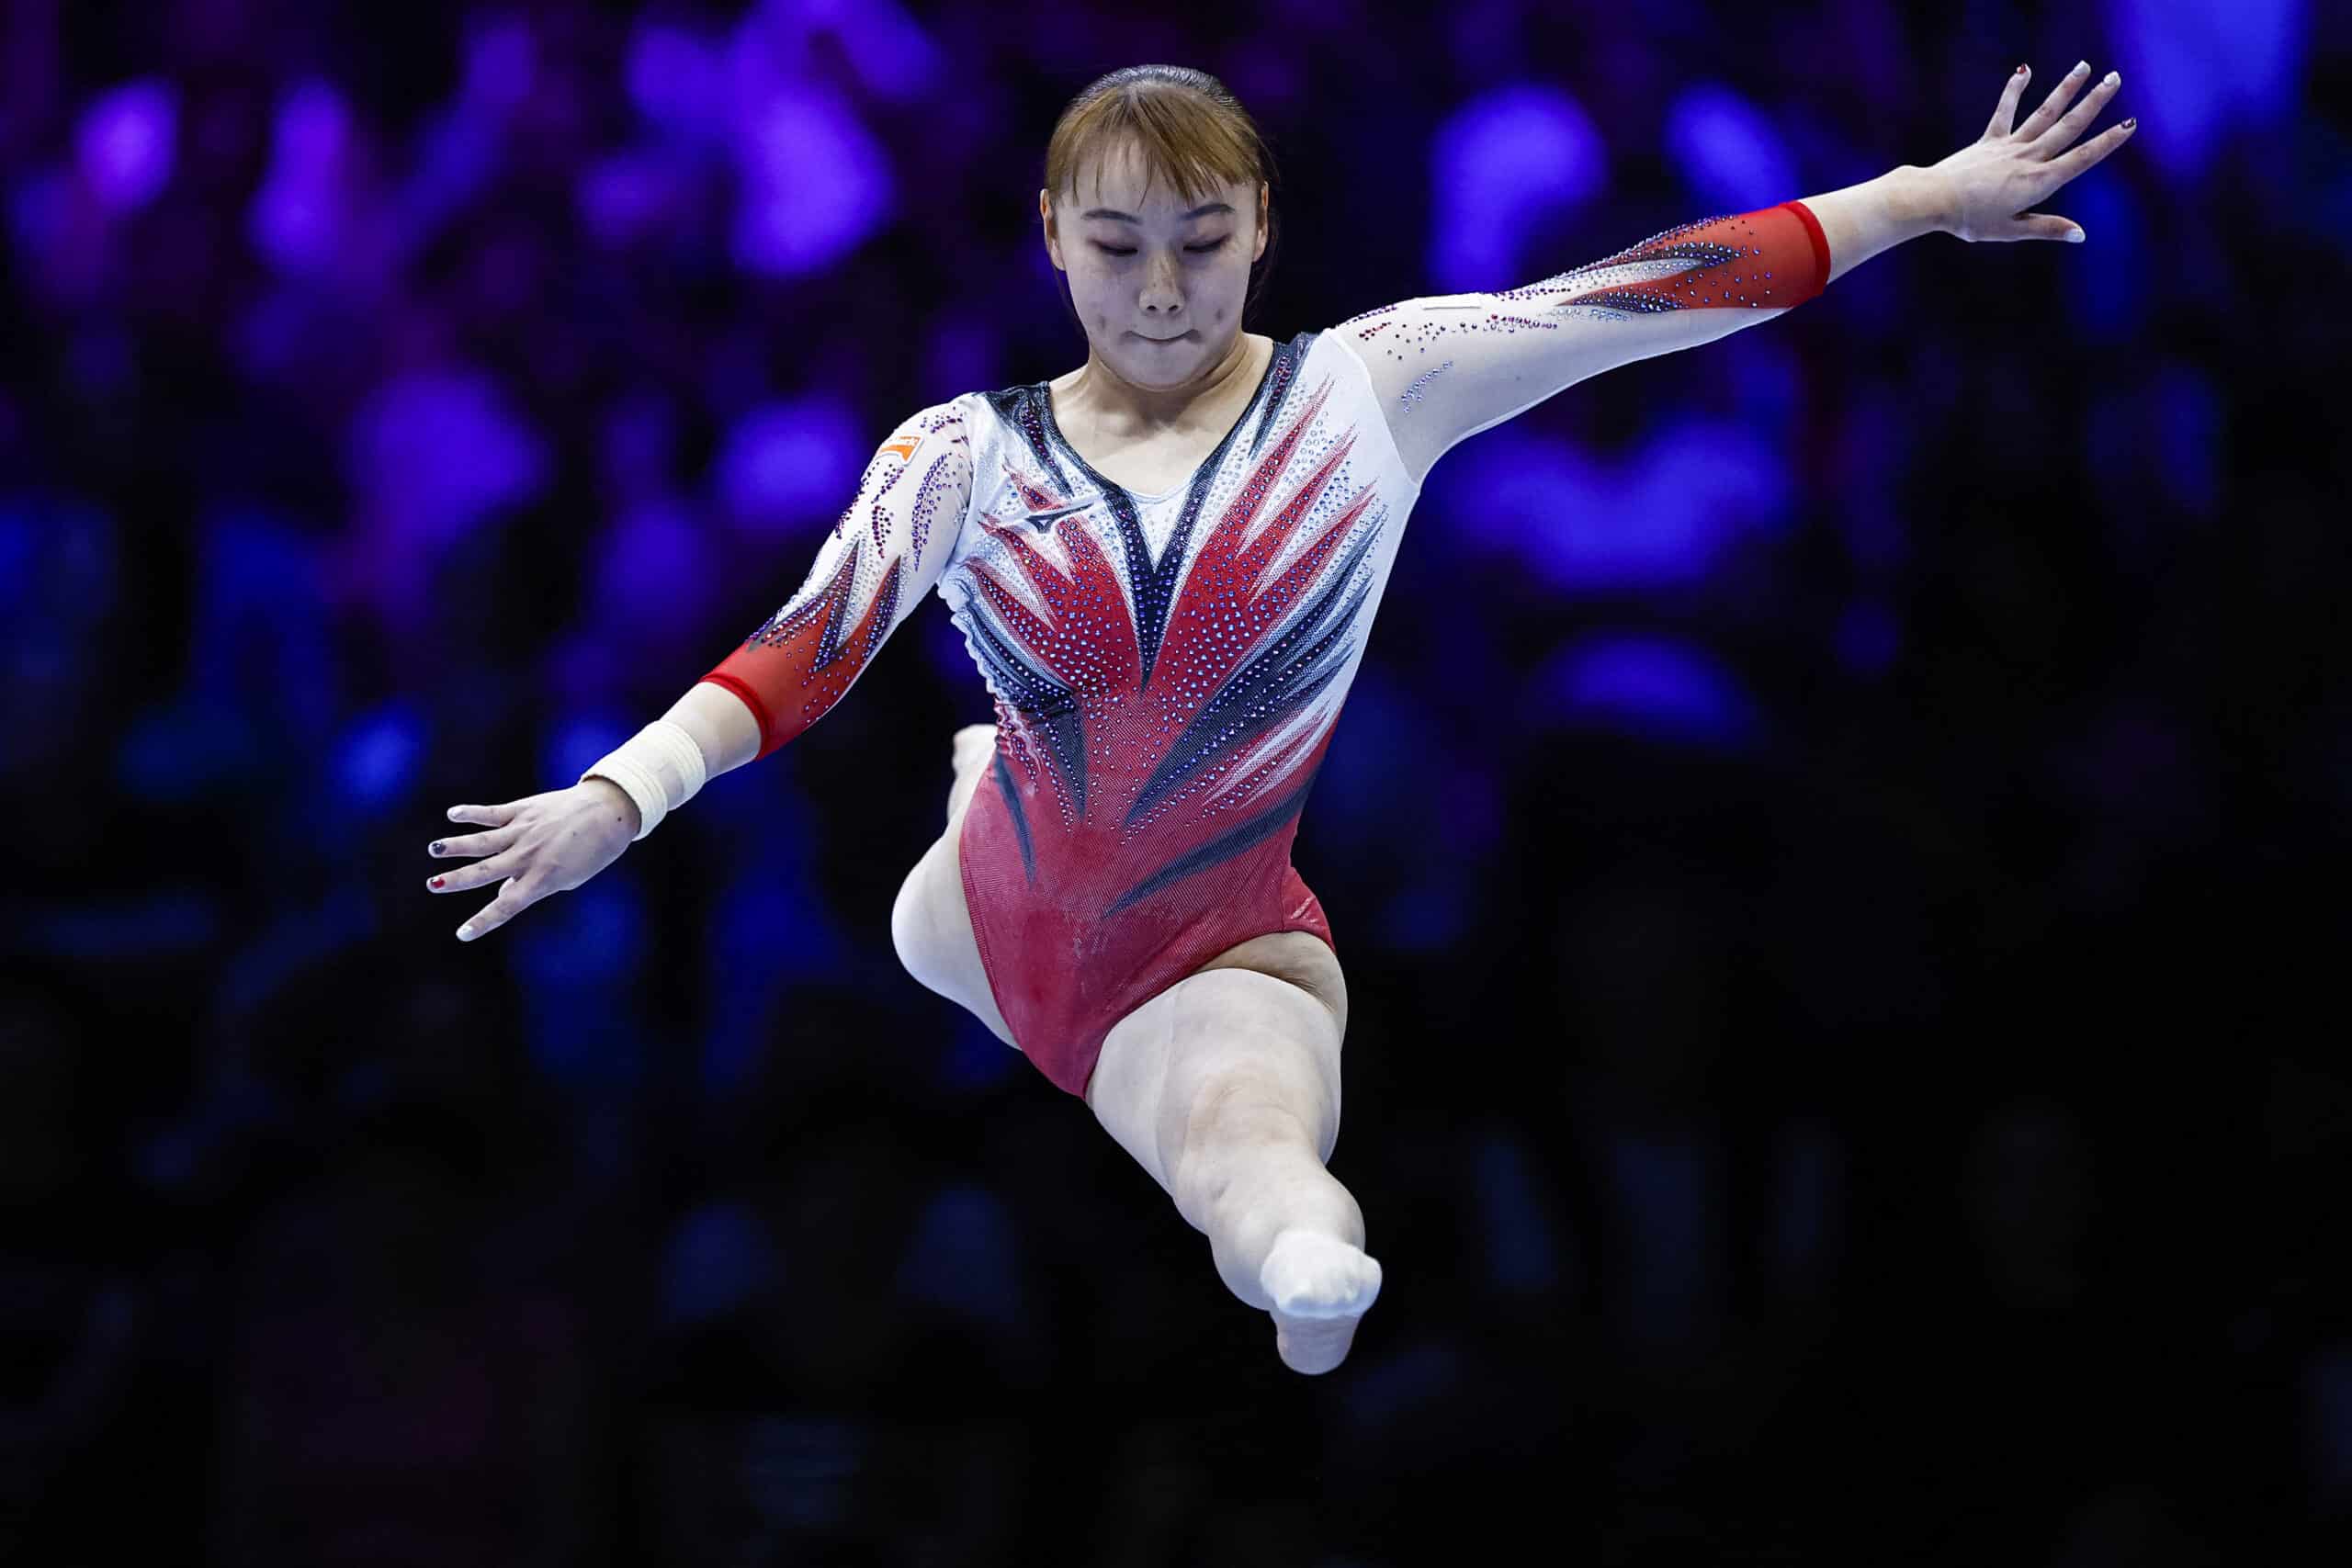 Japan's Shoko Miyata competes on the balance beam during the women's qualifying session the 52nd FIG Artistic Gymnastics World Championships, in Antwerp, northern Belgium, on October 2, 2023. (Photo by KENZO TRIBOUILLARD / AFP)